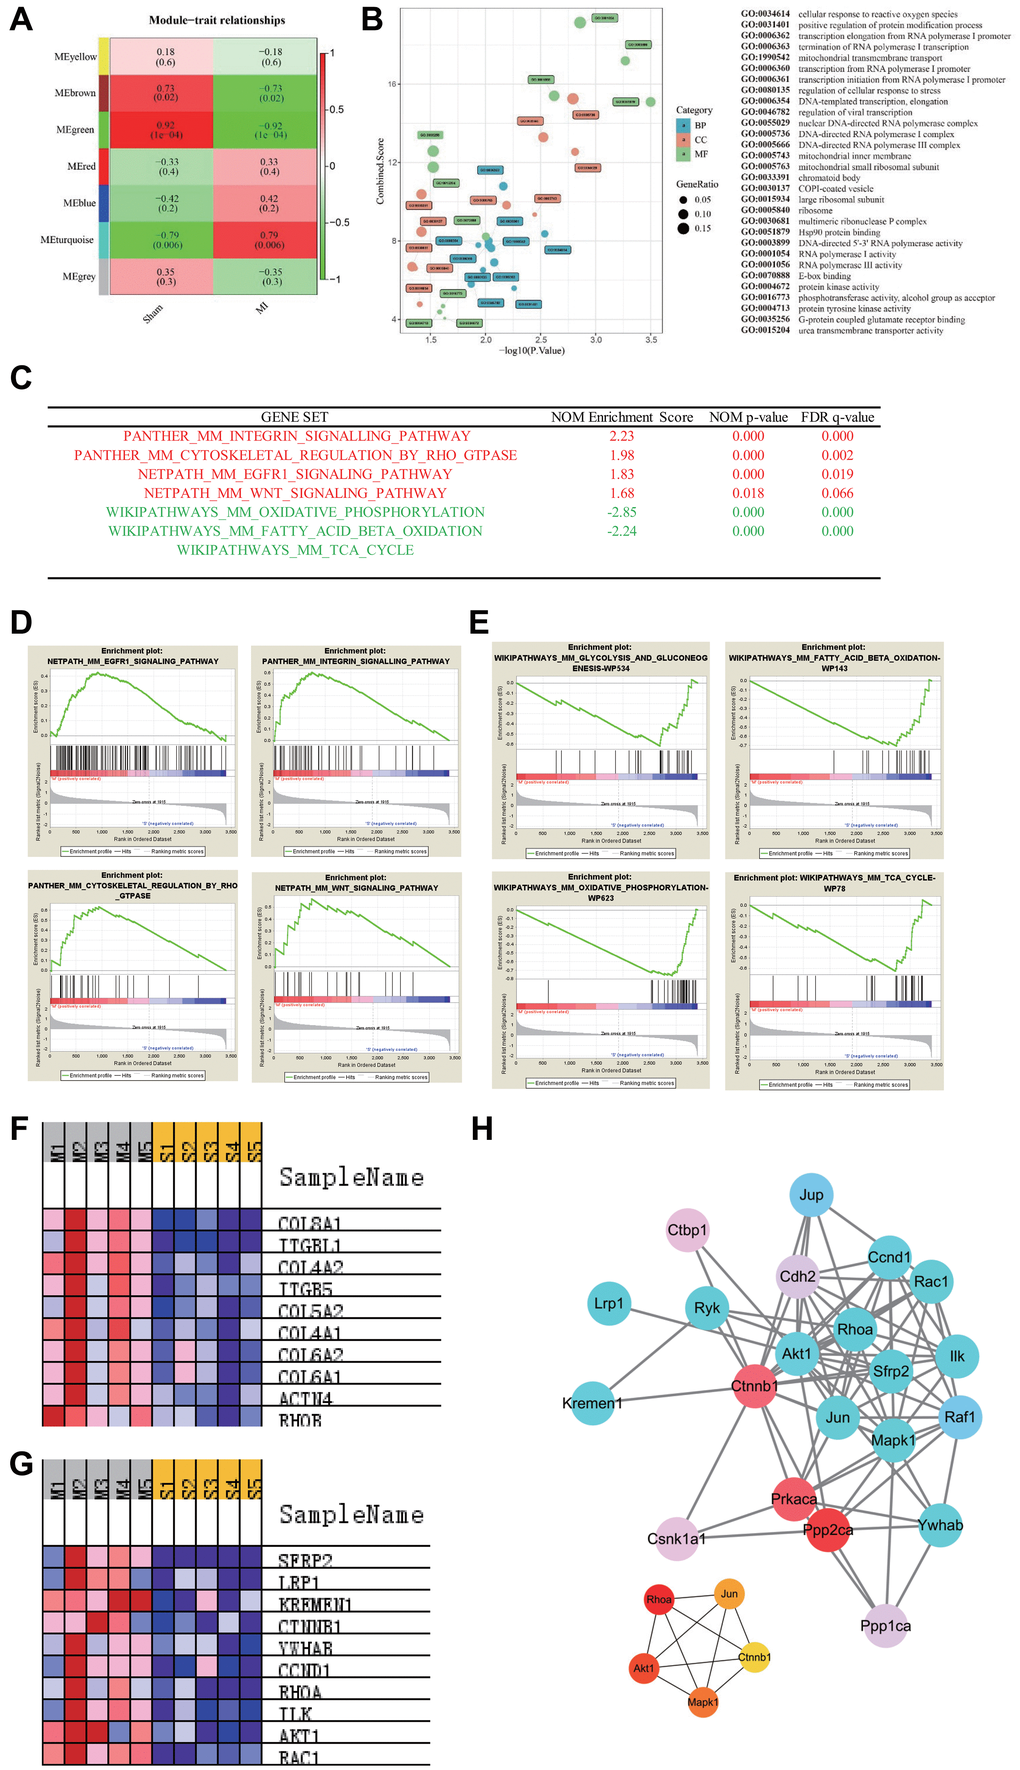 Pathways enrichment associated with advanced heart failure. (A) WGCNA identified demonstrated 7 modules by average linkage clustering. (B) Gene Ontology analysis of genes in the green module, which were more correlated with advanced heart failure. (C) List of the four significantly up-regulated (marked red) and four down-regulated gene sets (marked green) associated with advanced heart failure enriched in GSEA analysis. (D–E) Enrichment plots of four significantly up-regulated and down-regulated pathways. (F) Heatmap of the enriched genes in the Integrin signaling pathway. (G) Heatmap of the enriched genes in the WNT signaling pathway. (H) Protein-protein interaction network of WNT signaling pathway and hub genes involved in this network.